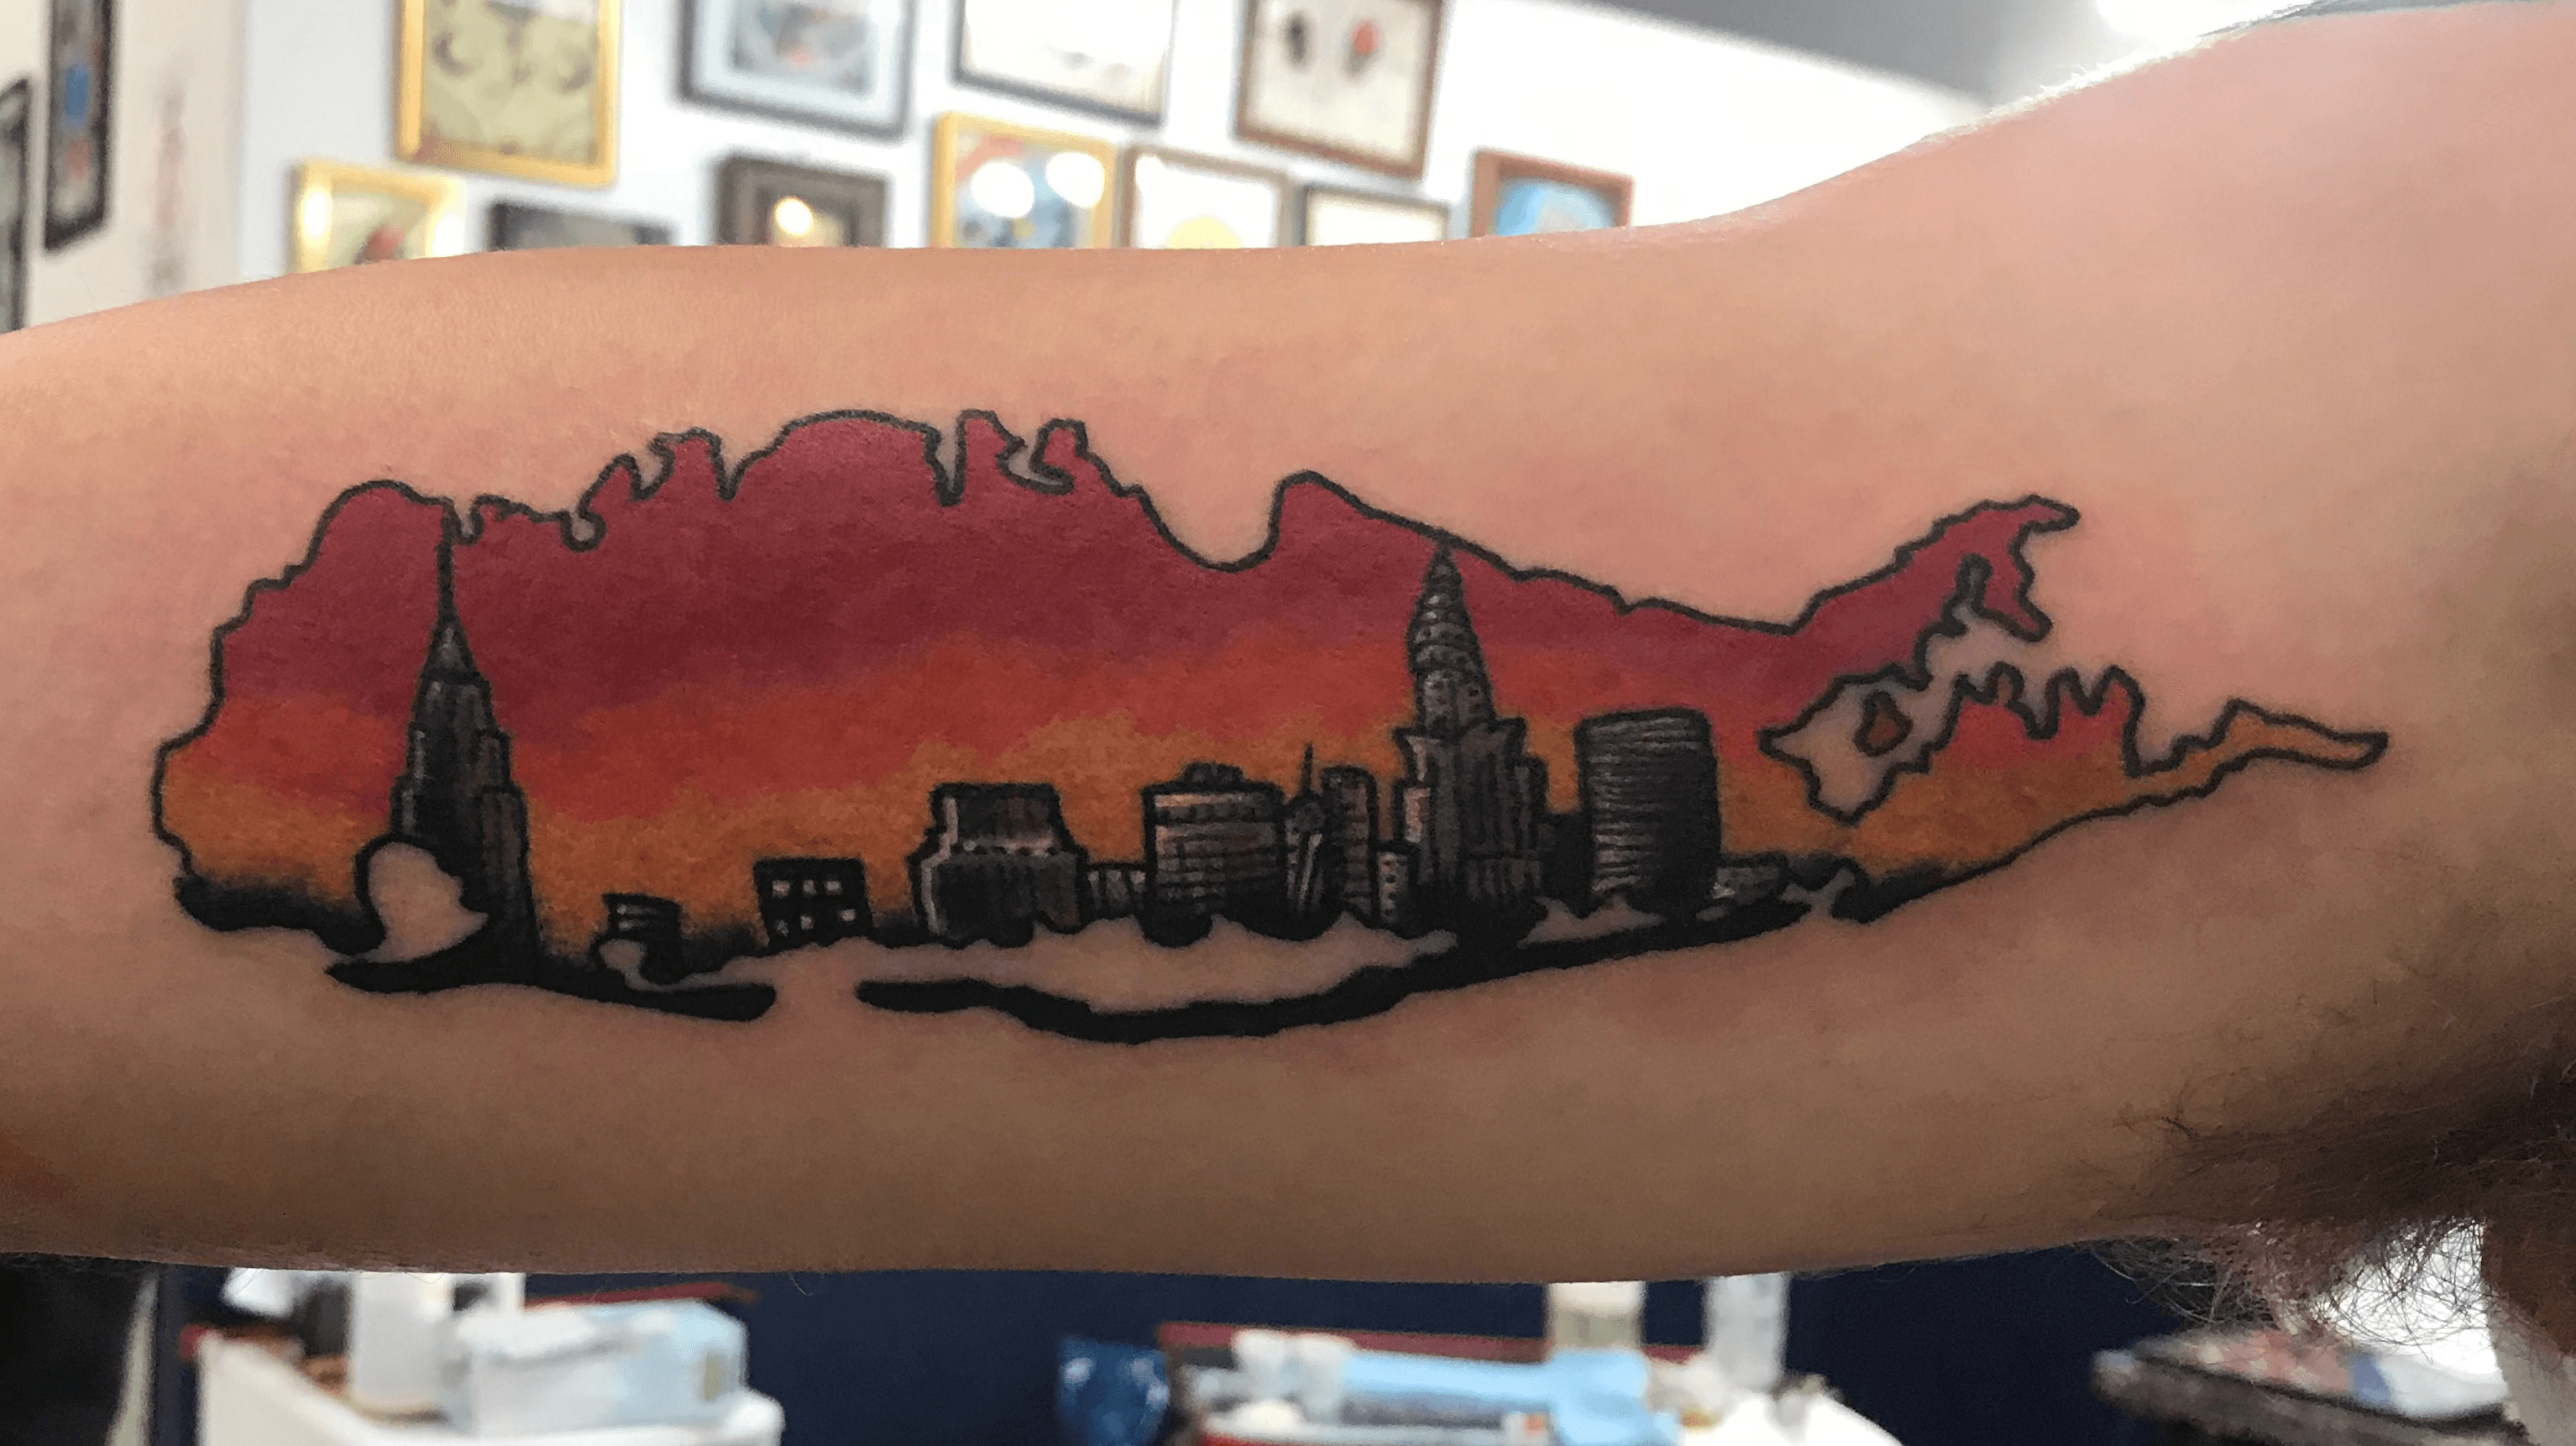 PHOTOS Dayton residents get tattoos to show love for their city